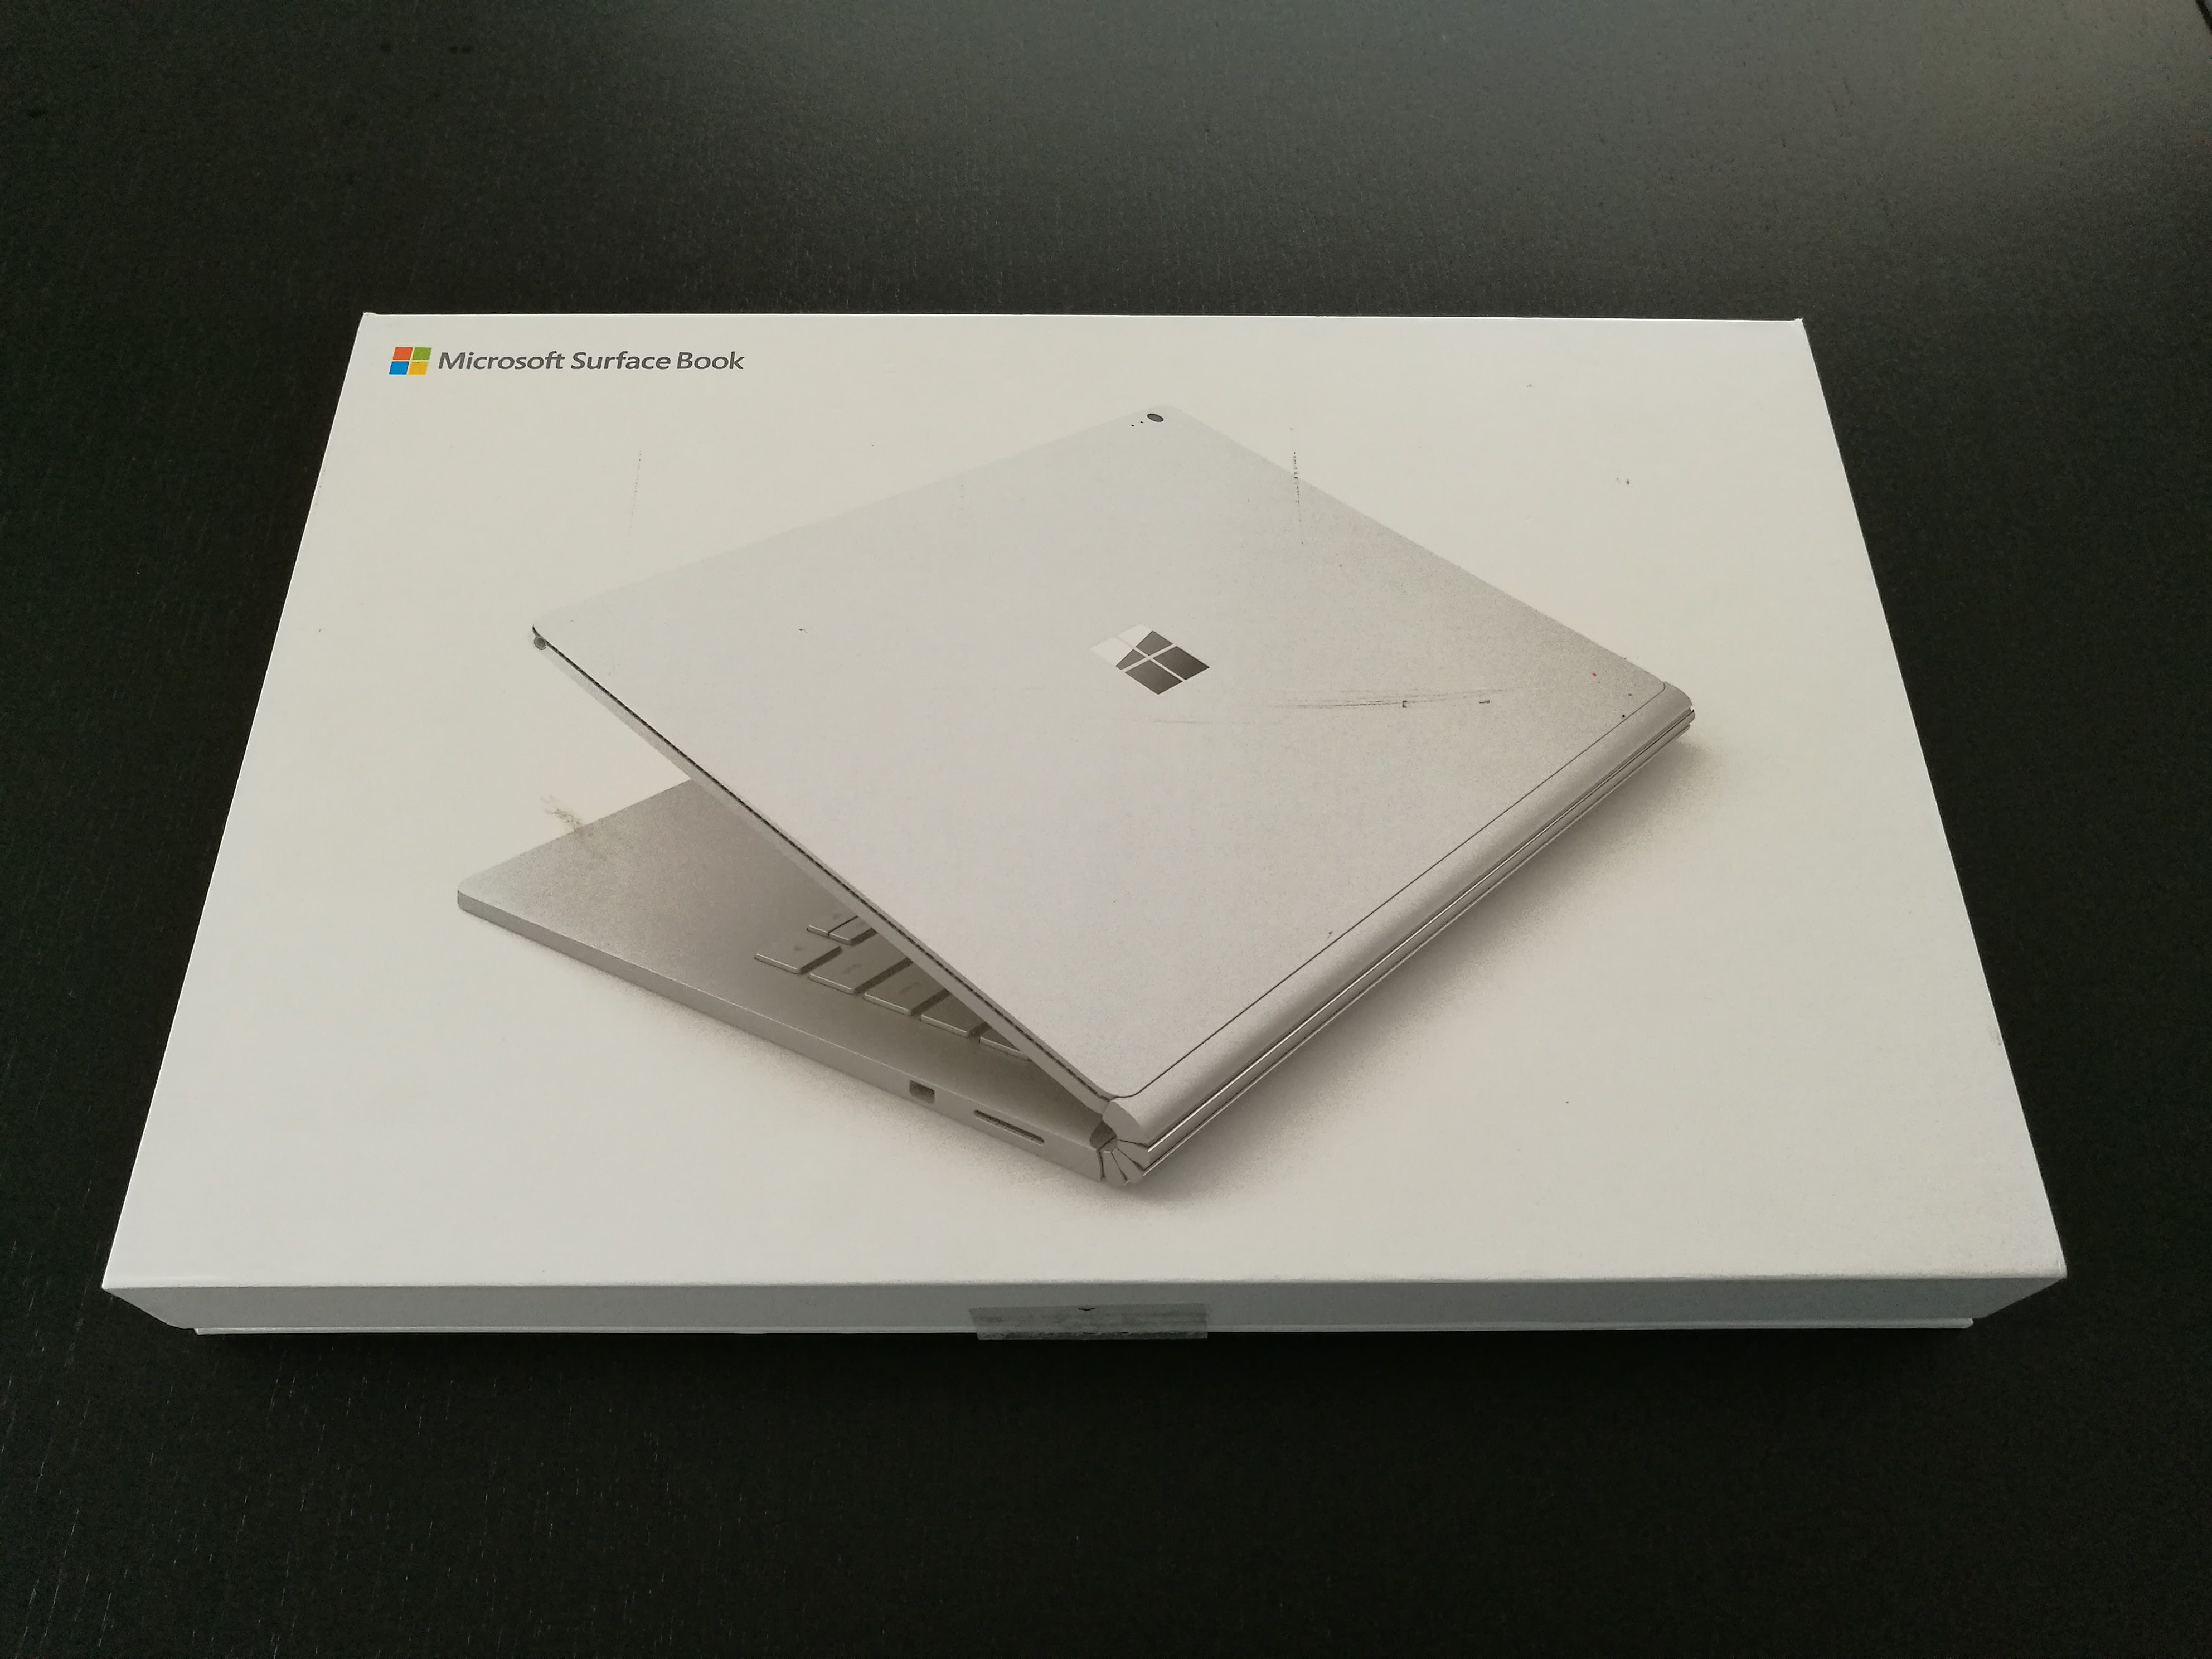 Review - Microsoft Surface book - THE EMPIRE